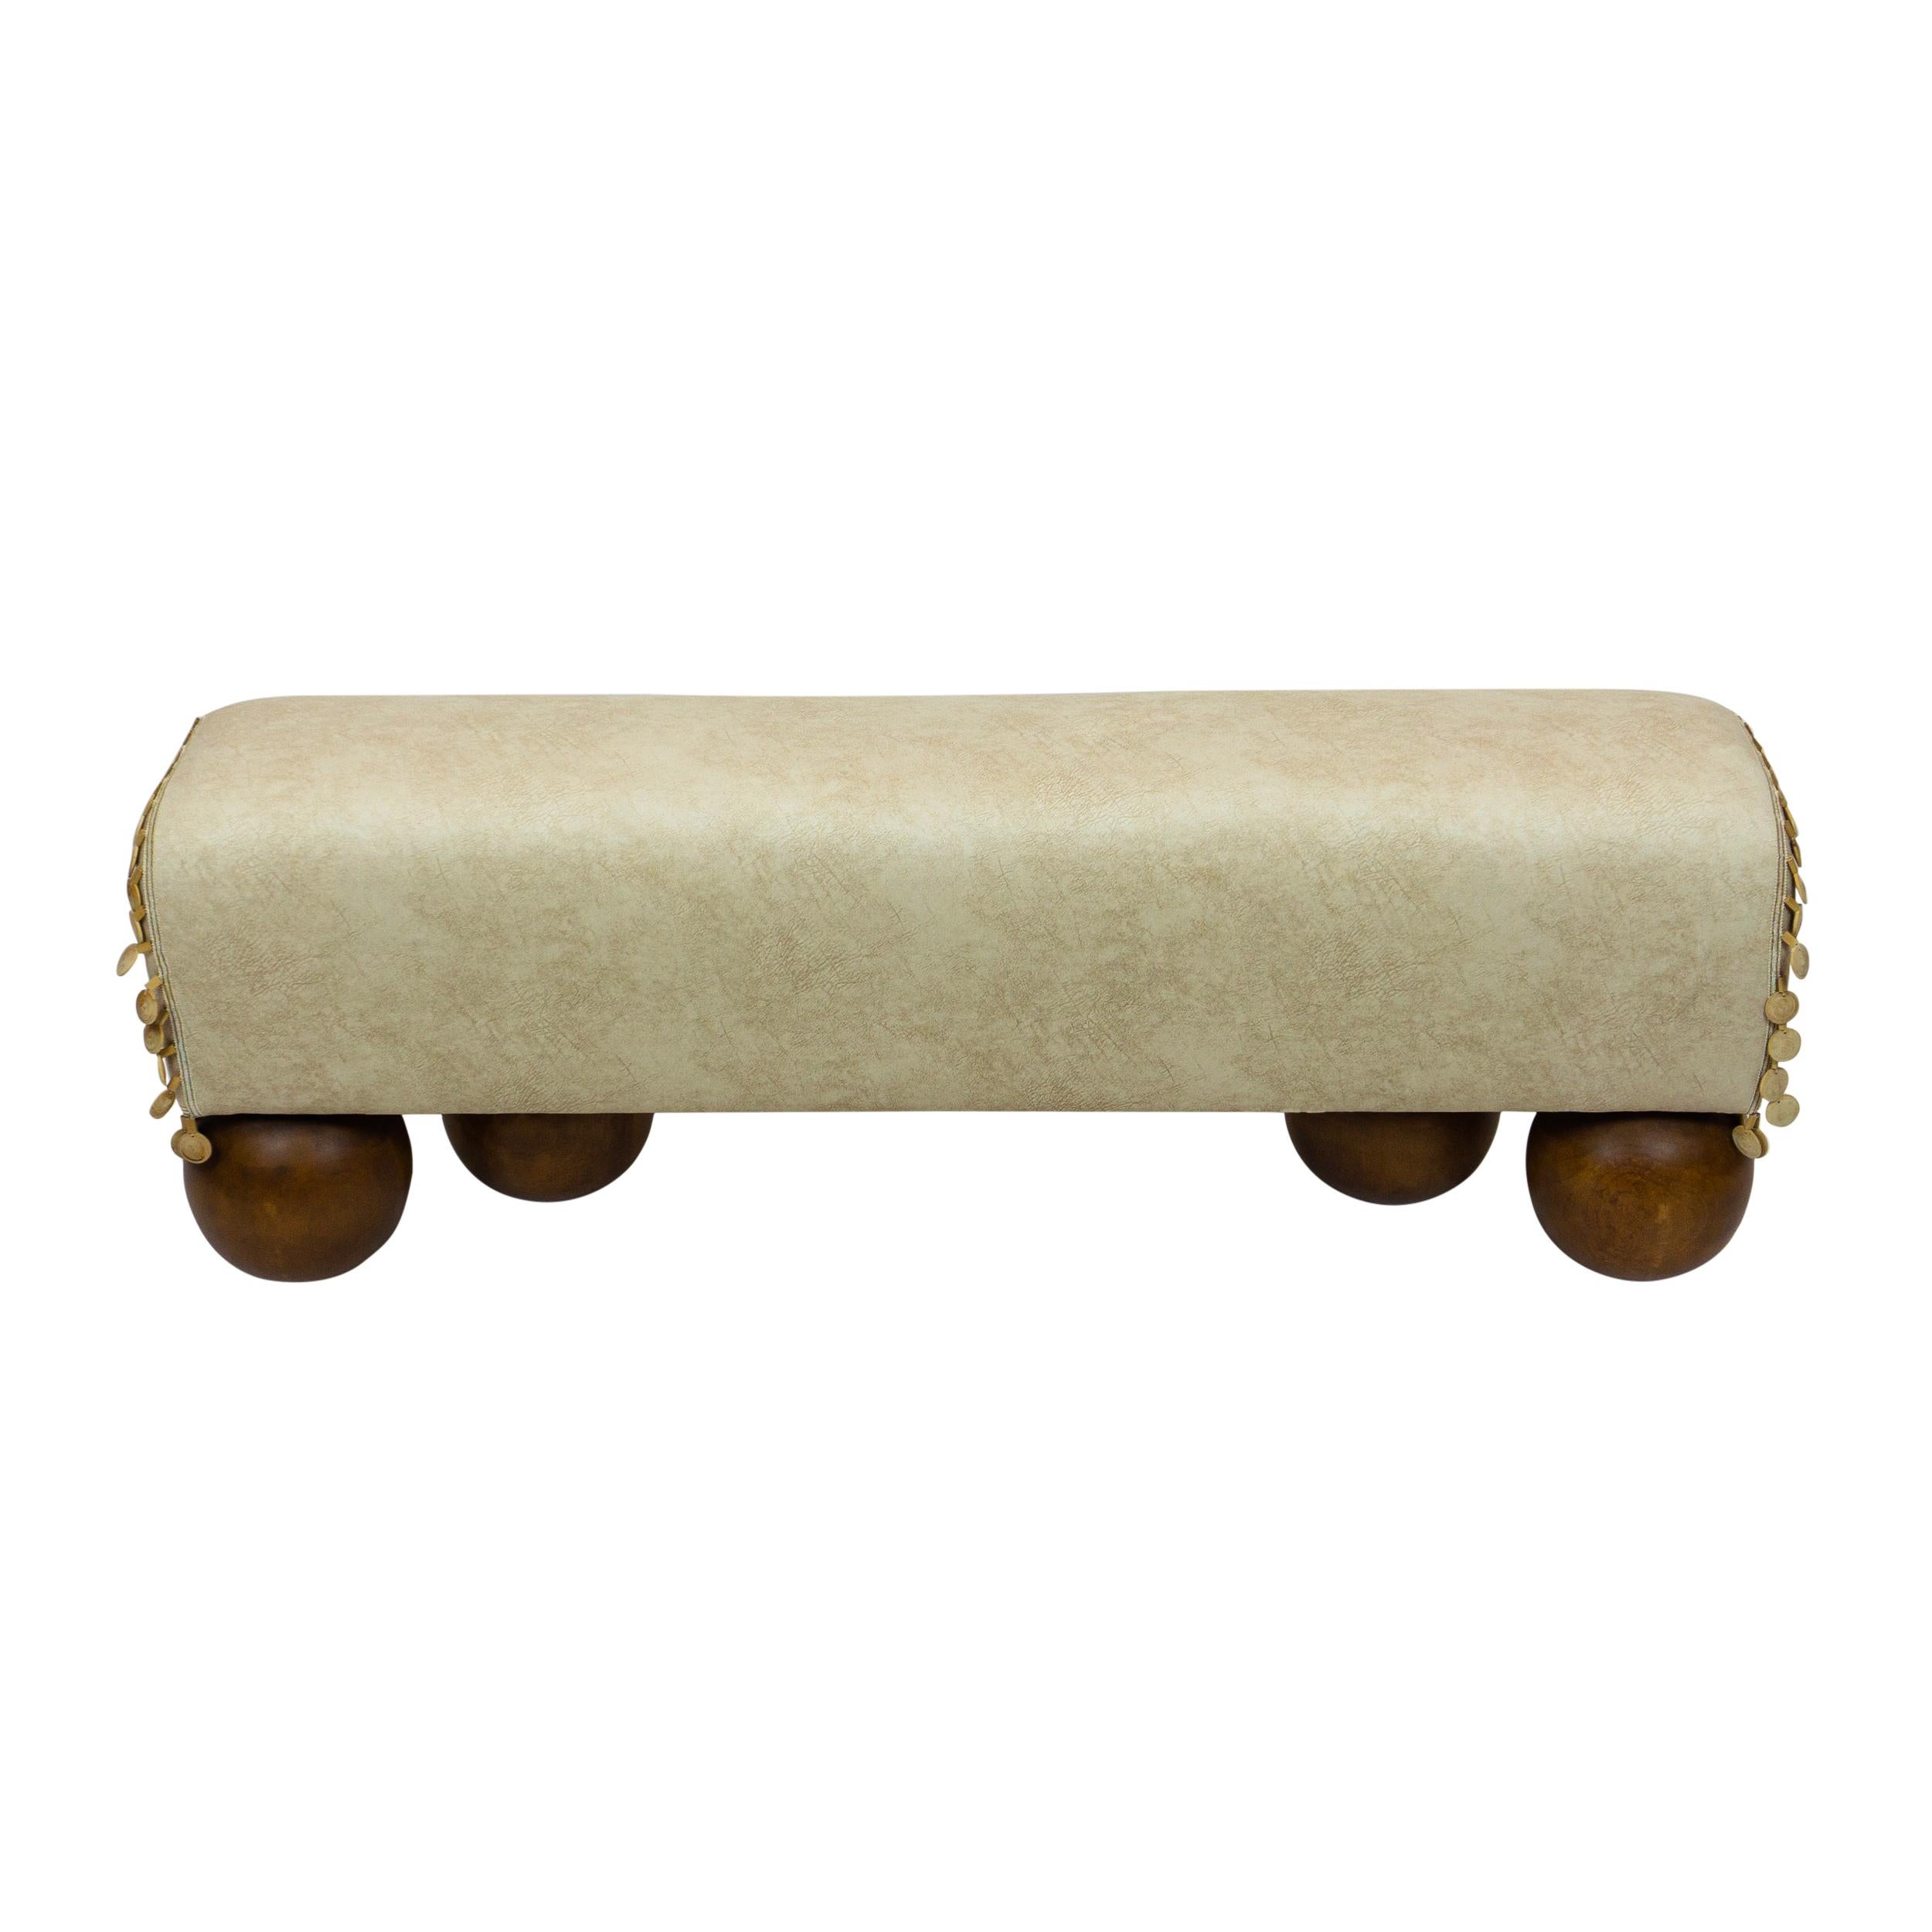 Velvet Walnut Ball Foot Bench with Saddle Shaped Seat - Customizable